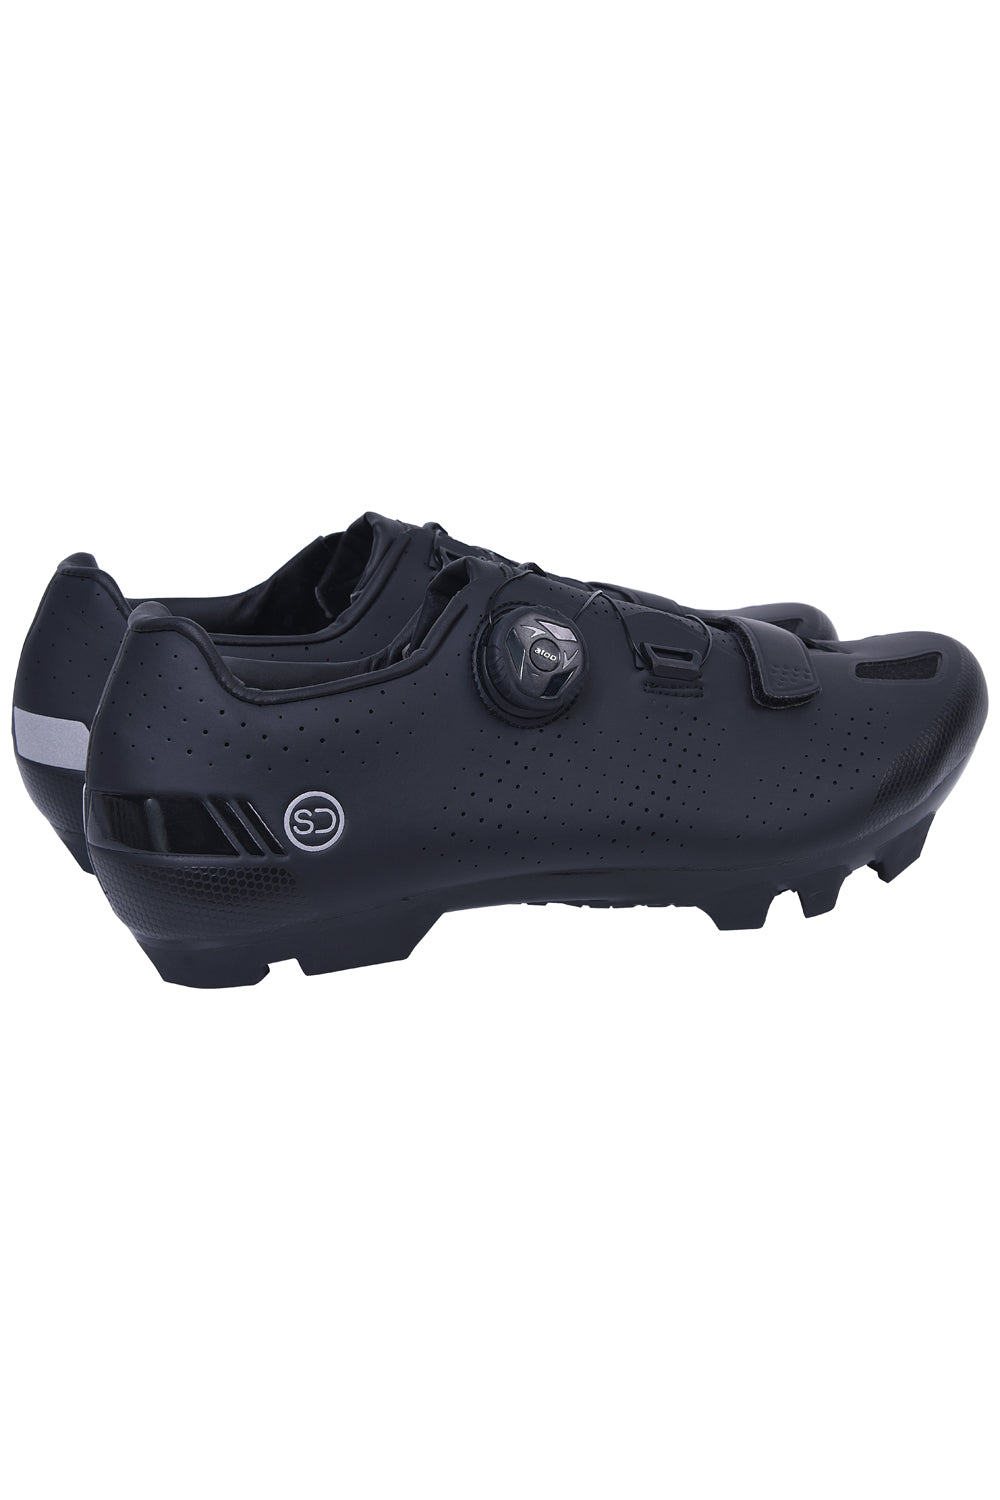 Sundried S-M1 Pro MTB Cycle Shoes Cycle Shoes Activewear